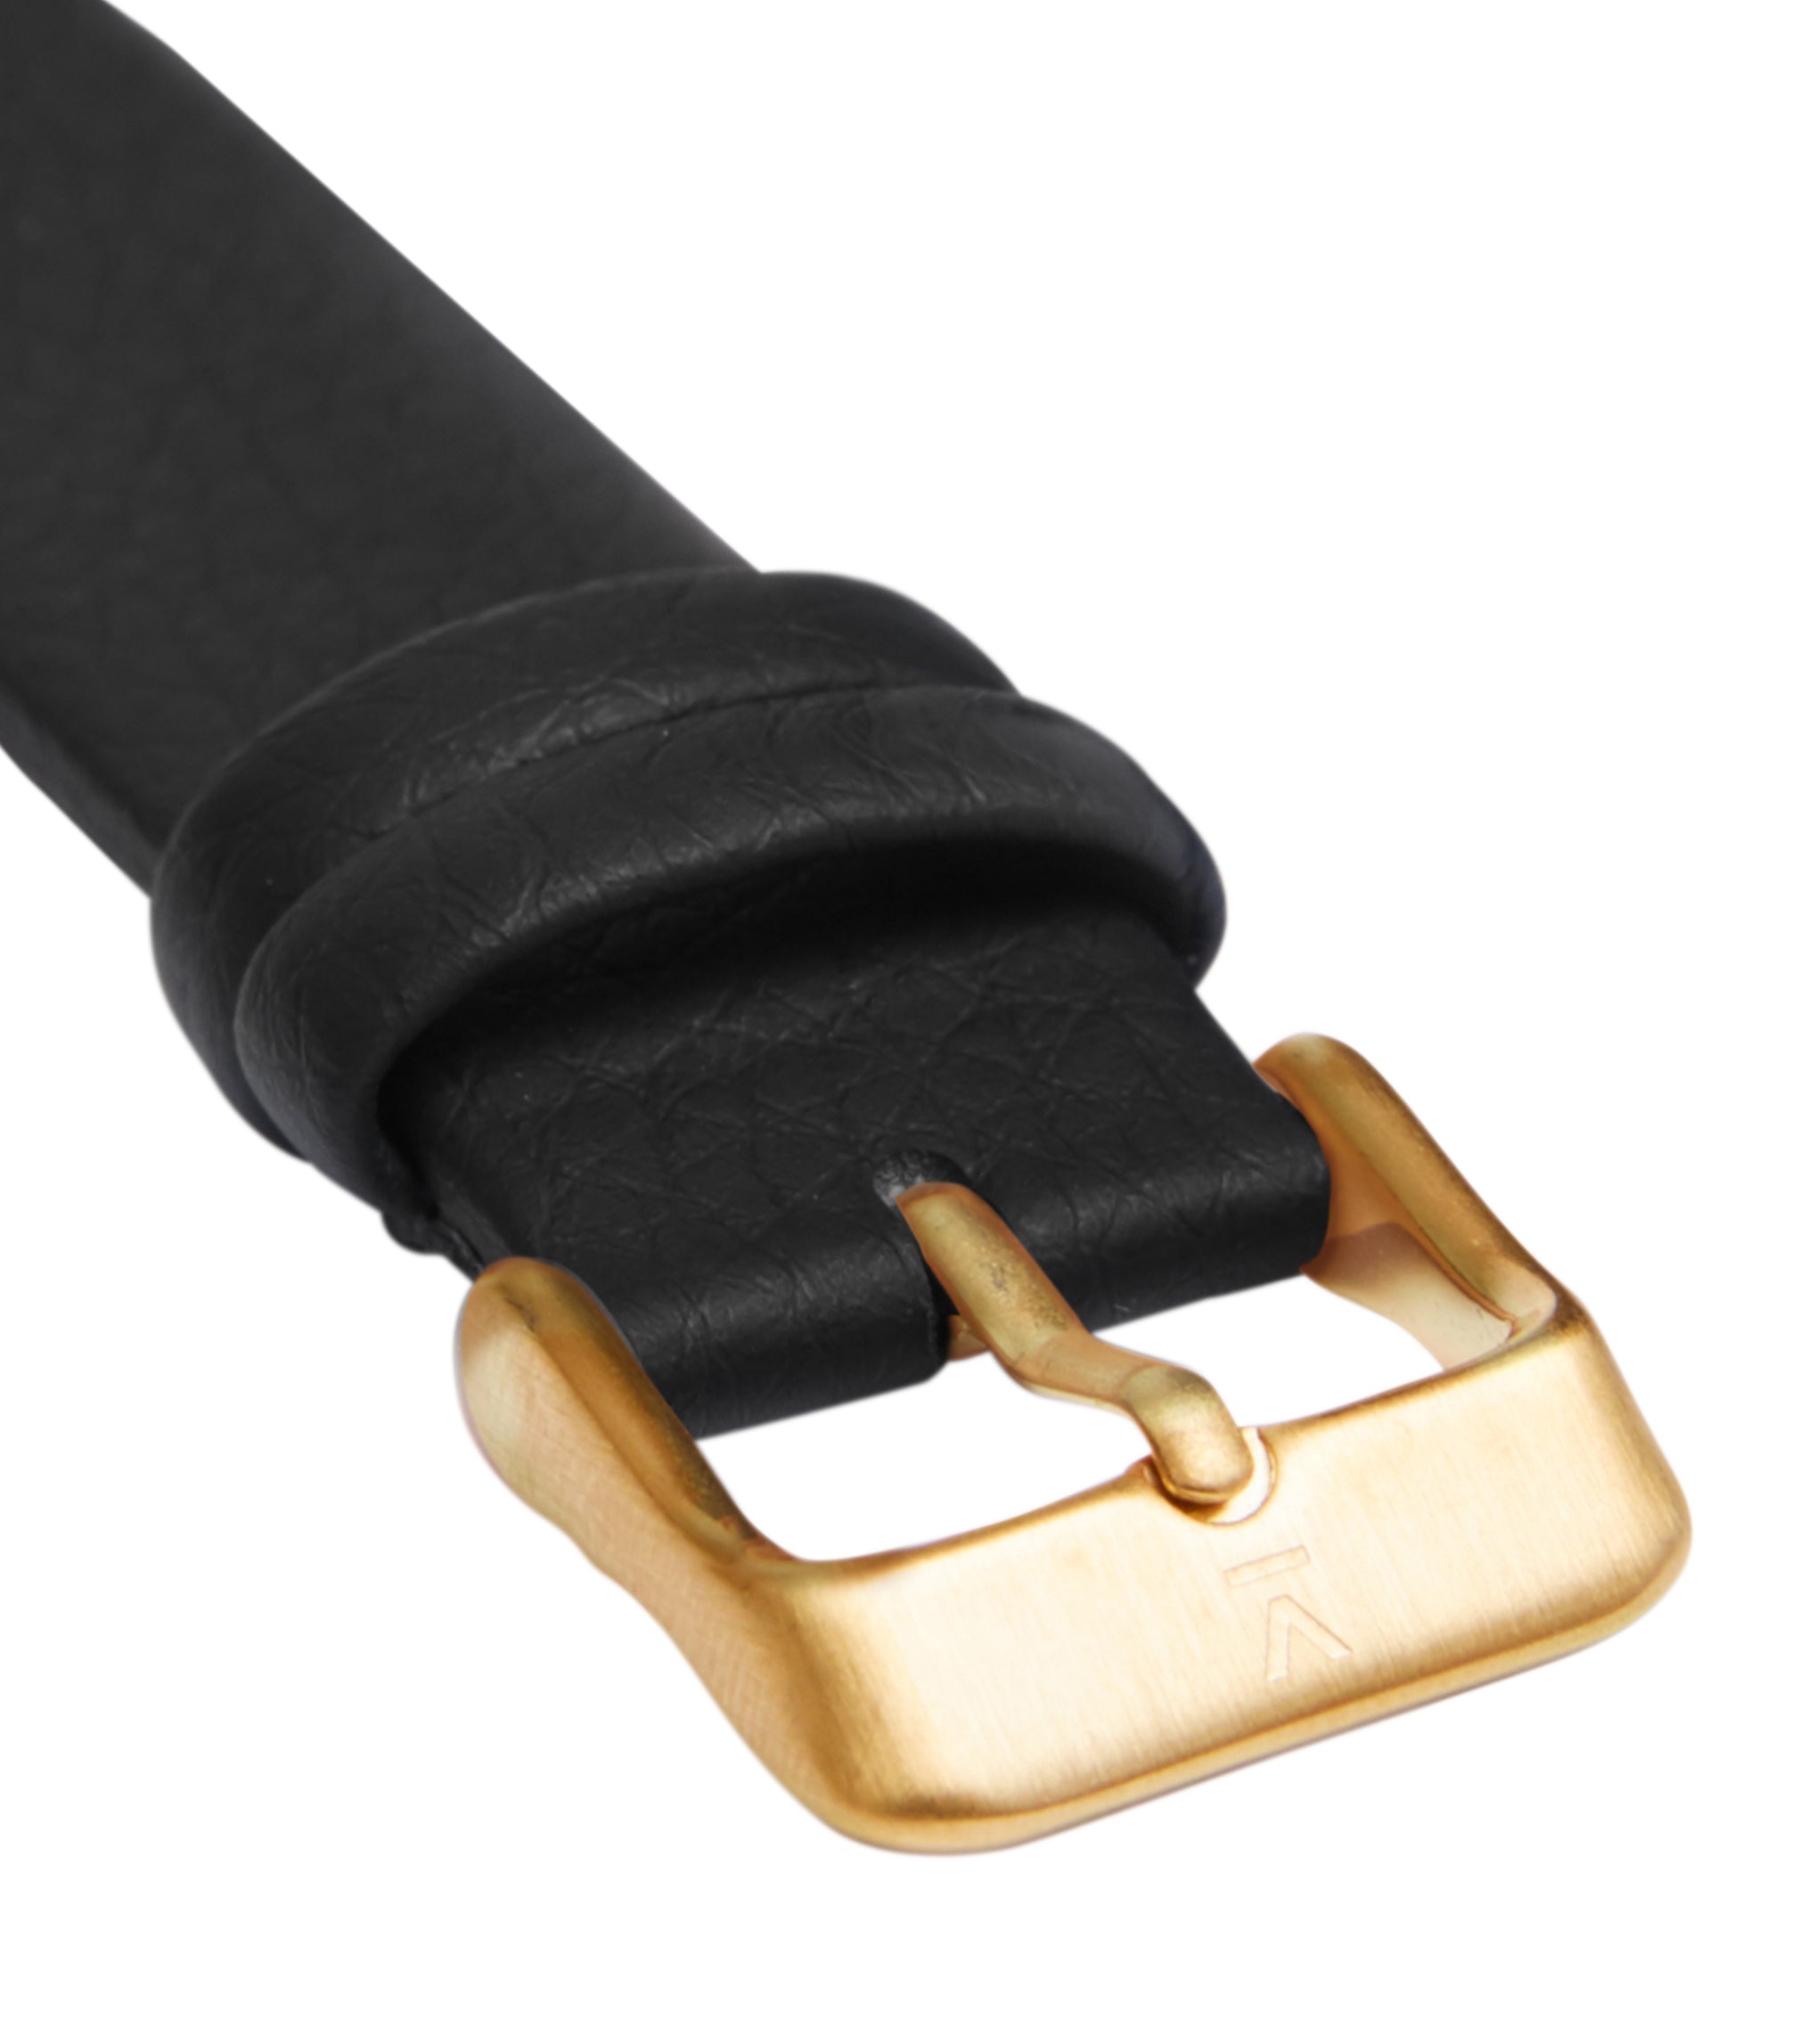 NewCollection_Buckle_GoldBlack.jpg